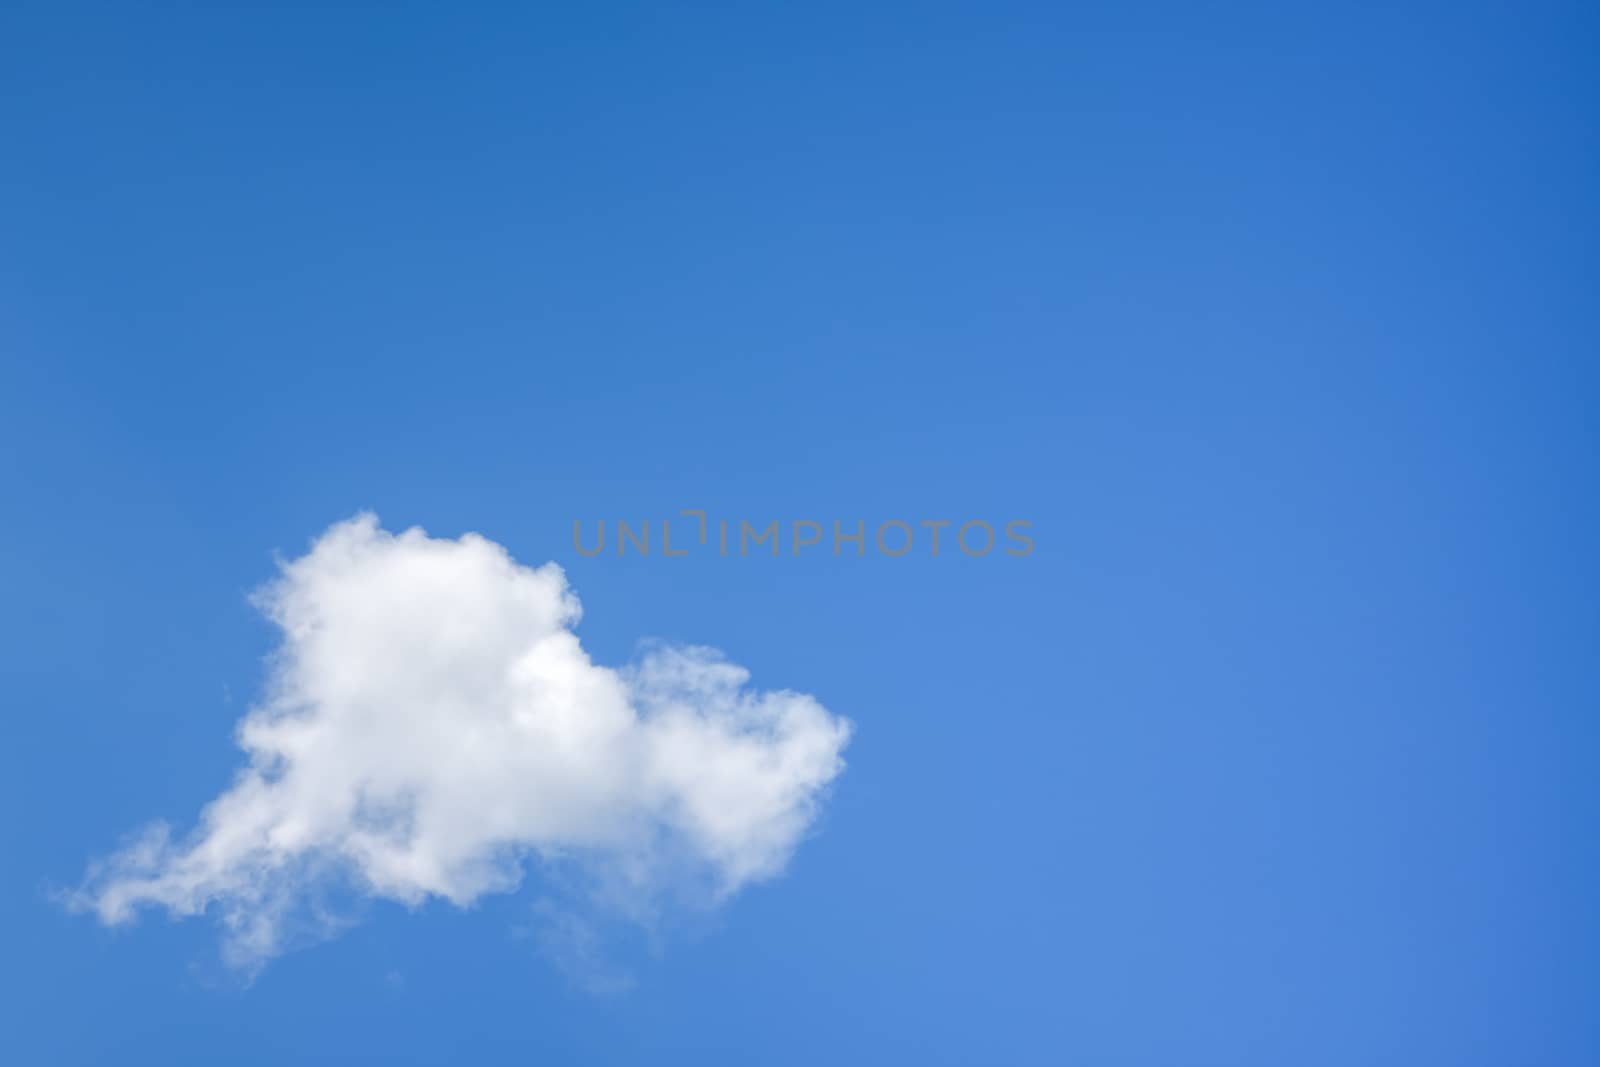 single cloud in the blue sky background by magann